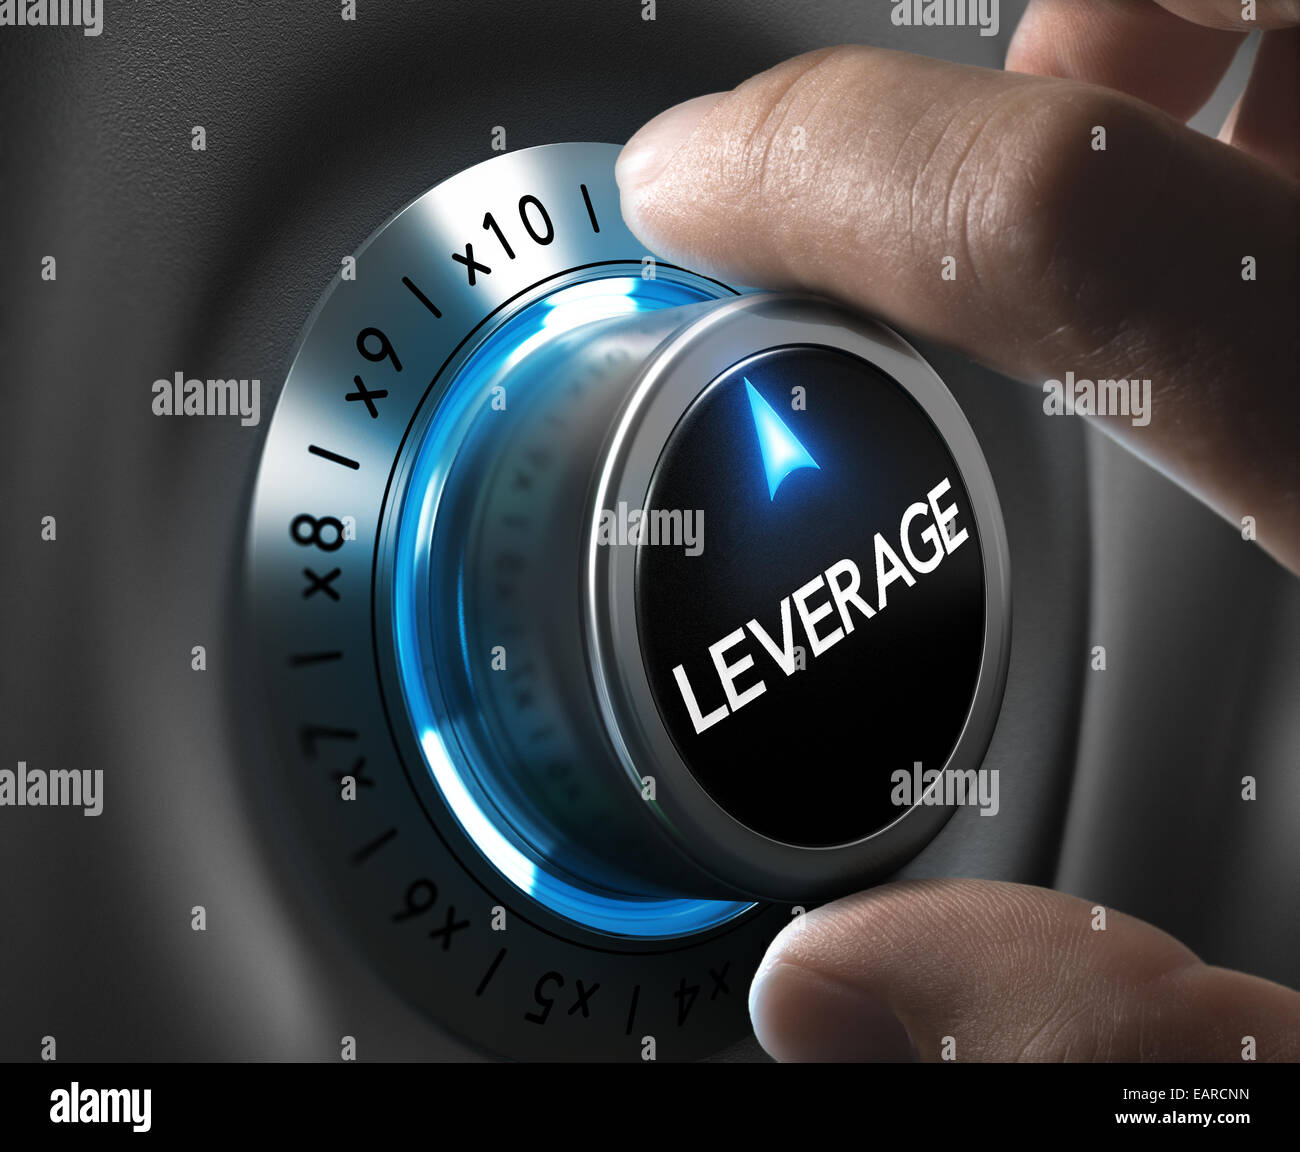 Leverage button pointing x10 position with two fingers, blue and grey tones, Conceptual image for day trading strategy. Stock Photo